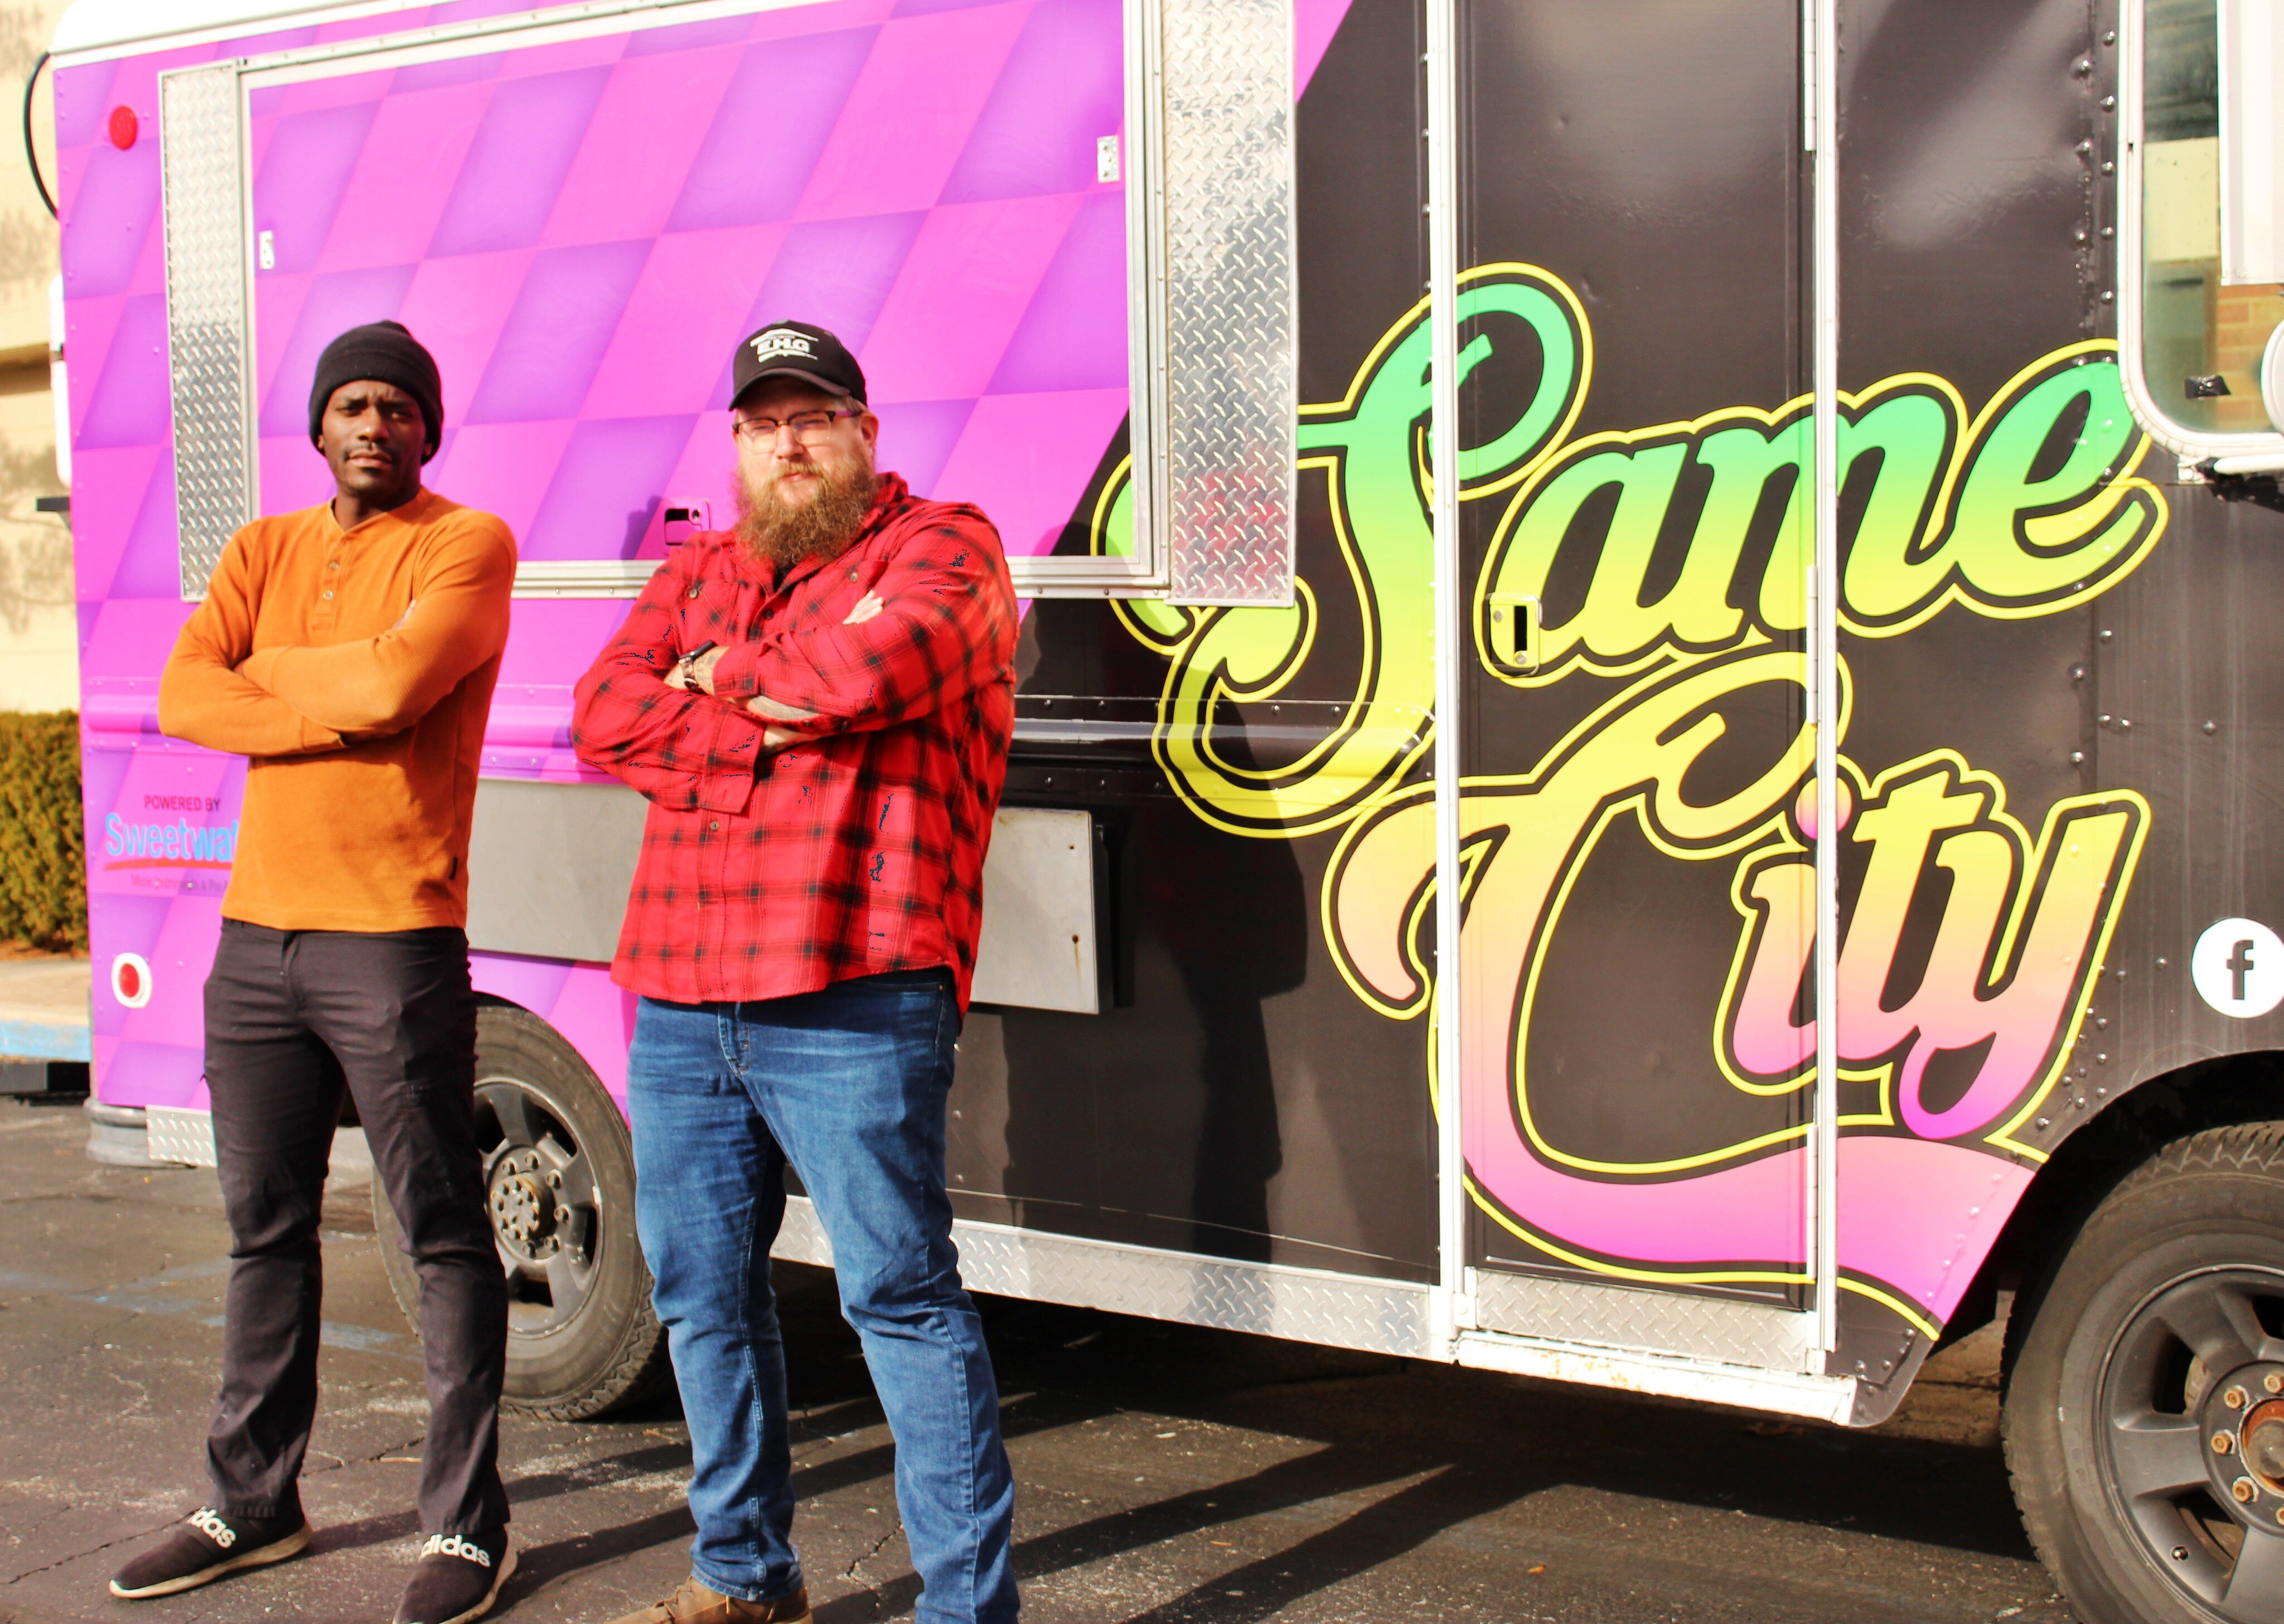 Same City Food Truck serves restaurant-quality meals to low-income and no-income individuals who may be experiencing homelessness.